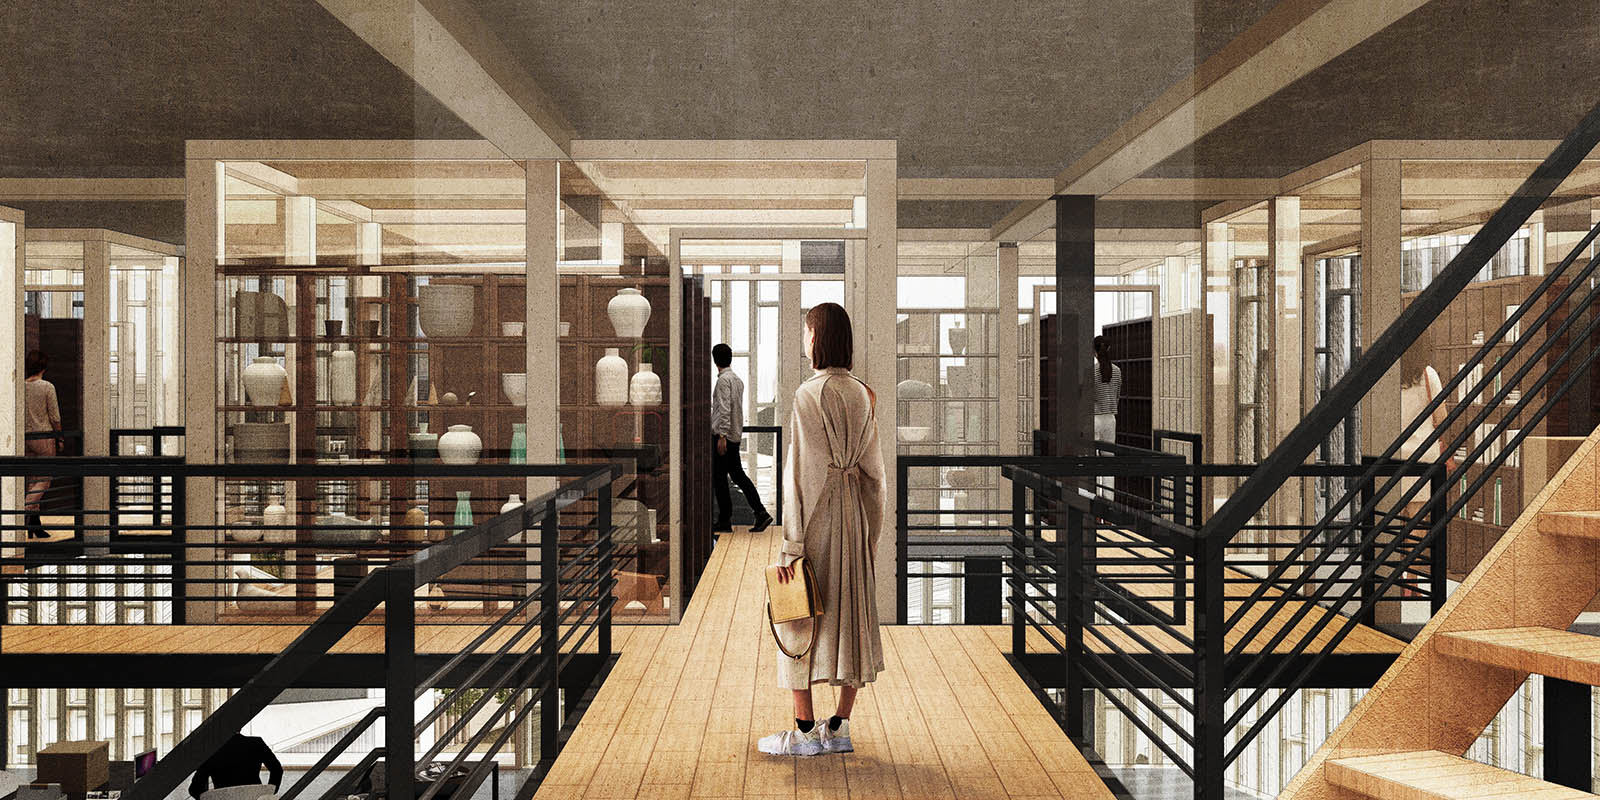 visualization of a woman inside a building with staircases to the left and right of her and objects on the shelves